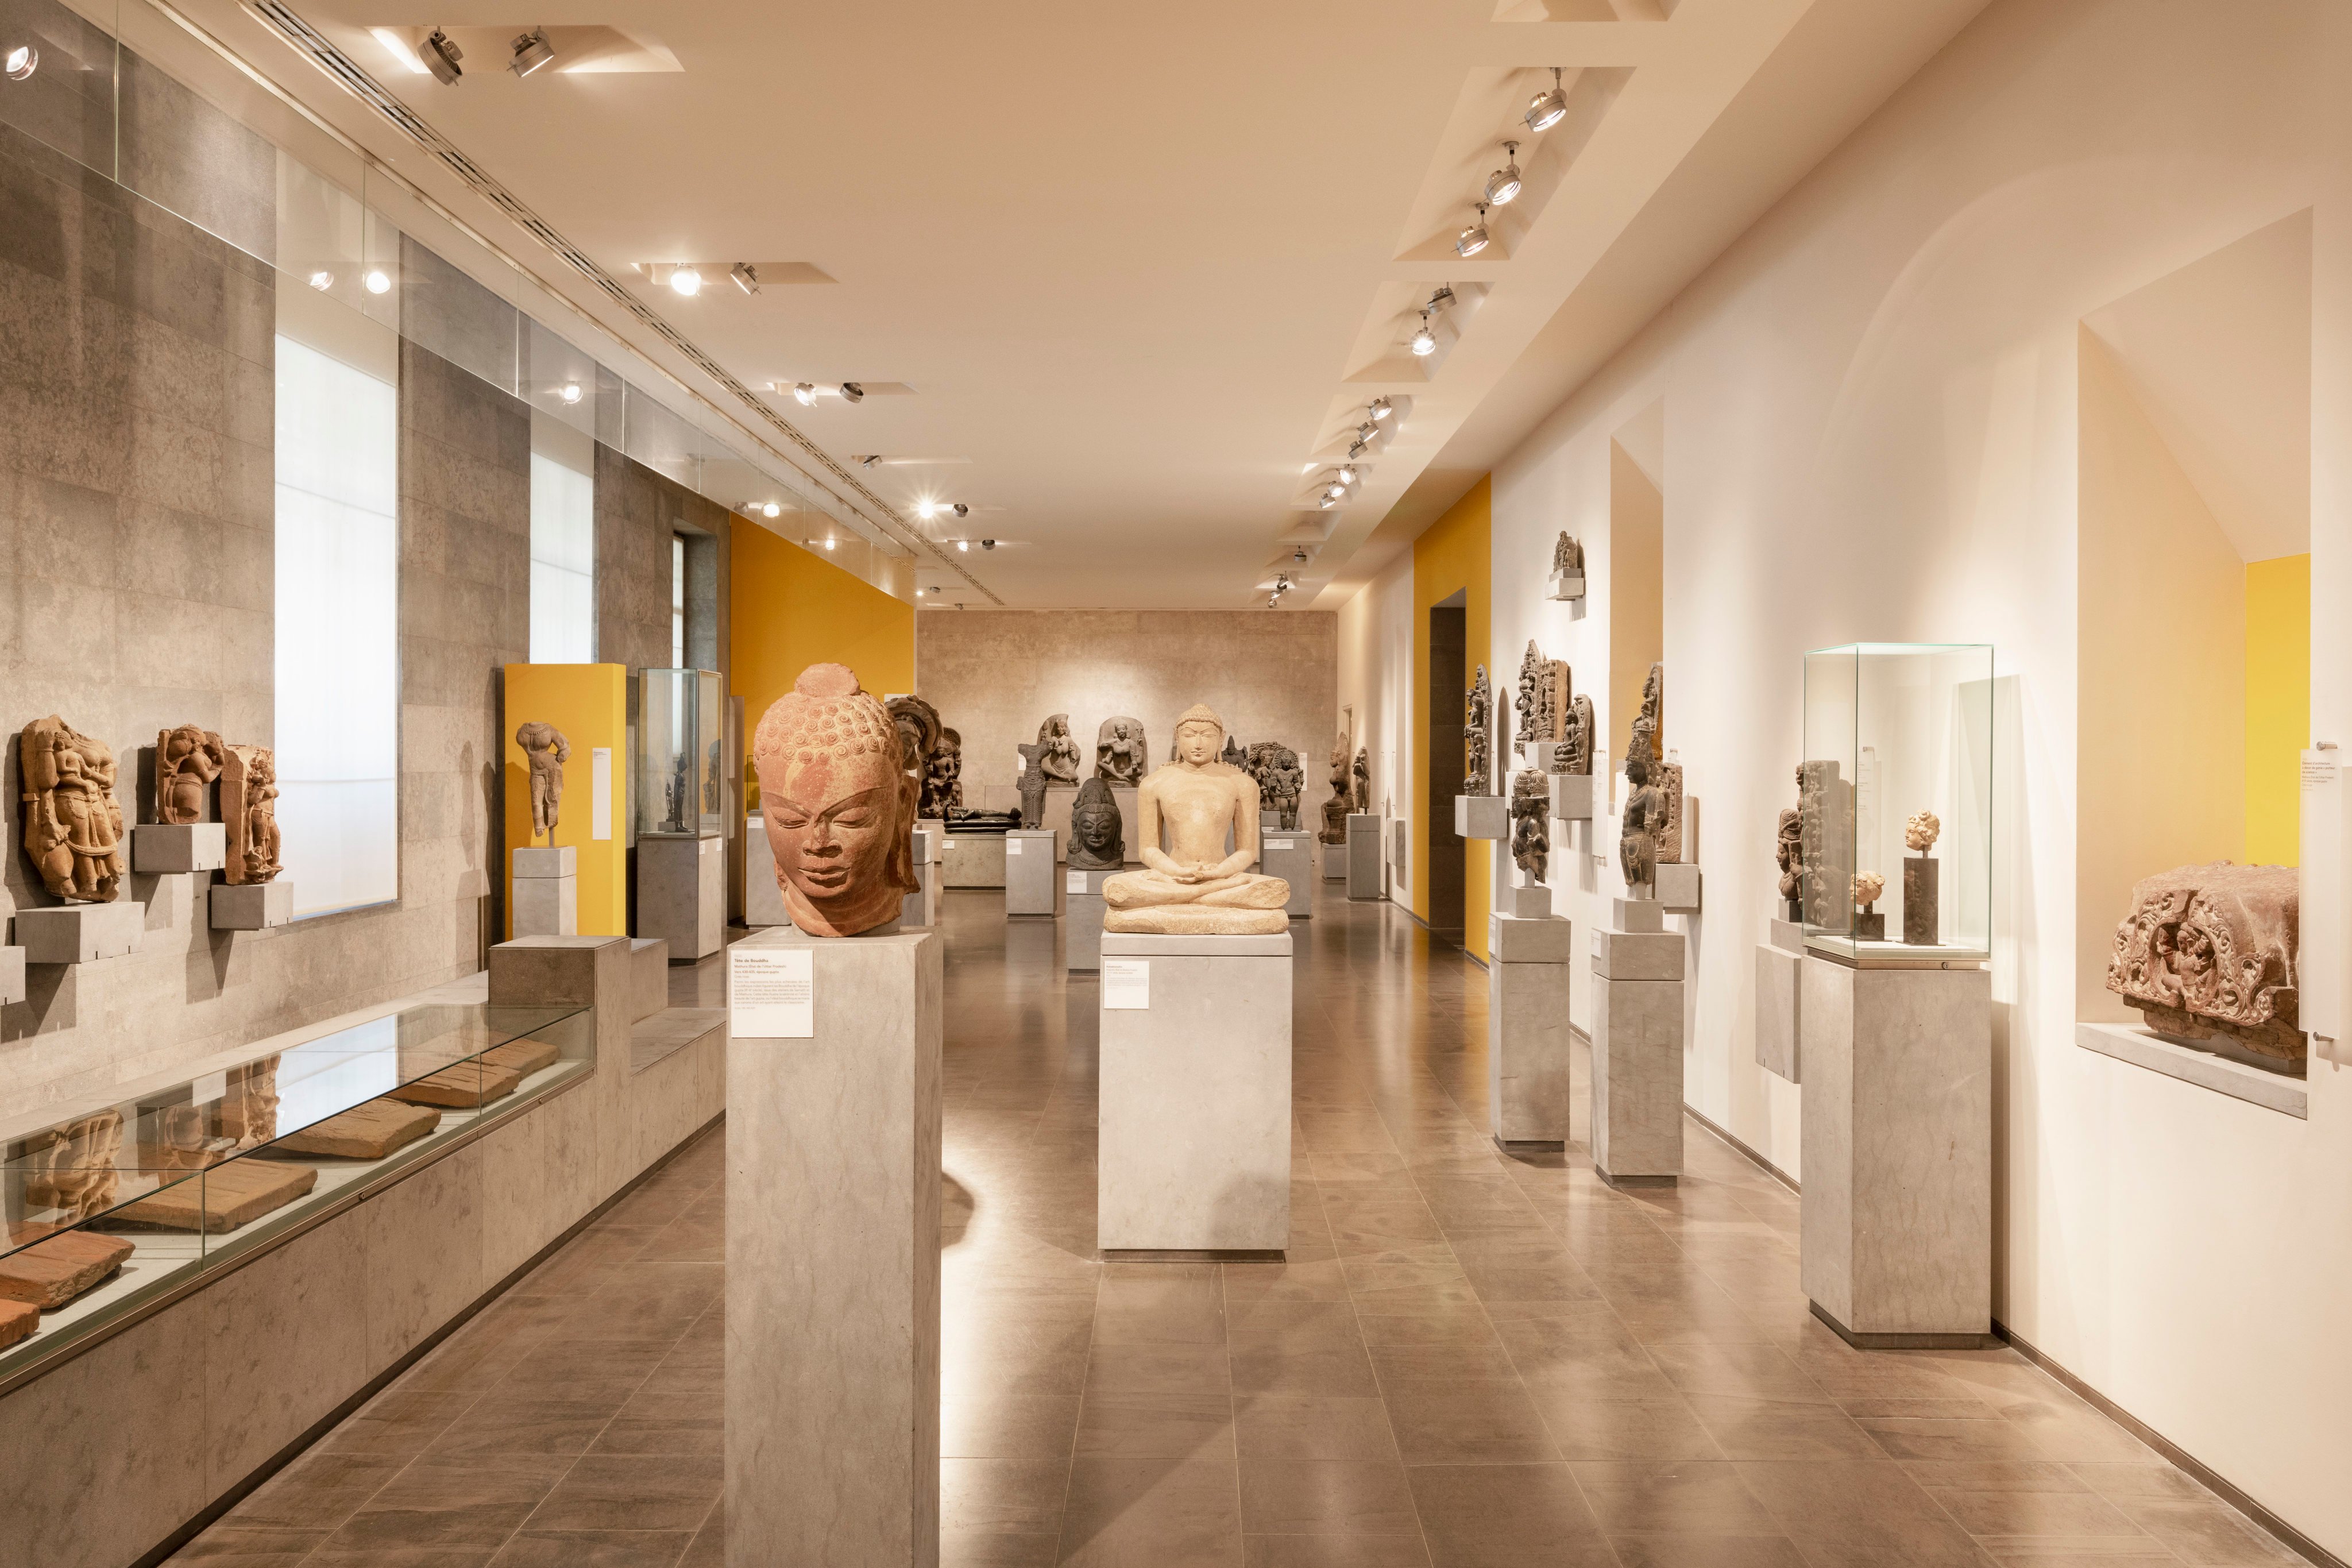 Musée Guimet’s collection is easily one of the largest Asian art collections in Europe, with the only notable competitors in size being the British Museum and the Victoria & Albert Museum, both in London. Photo: Guimet National Museum of Asian Arts
